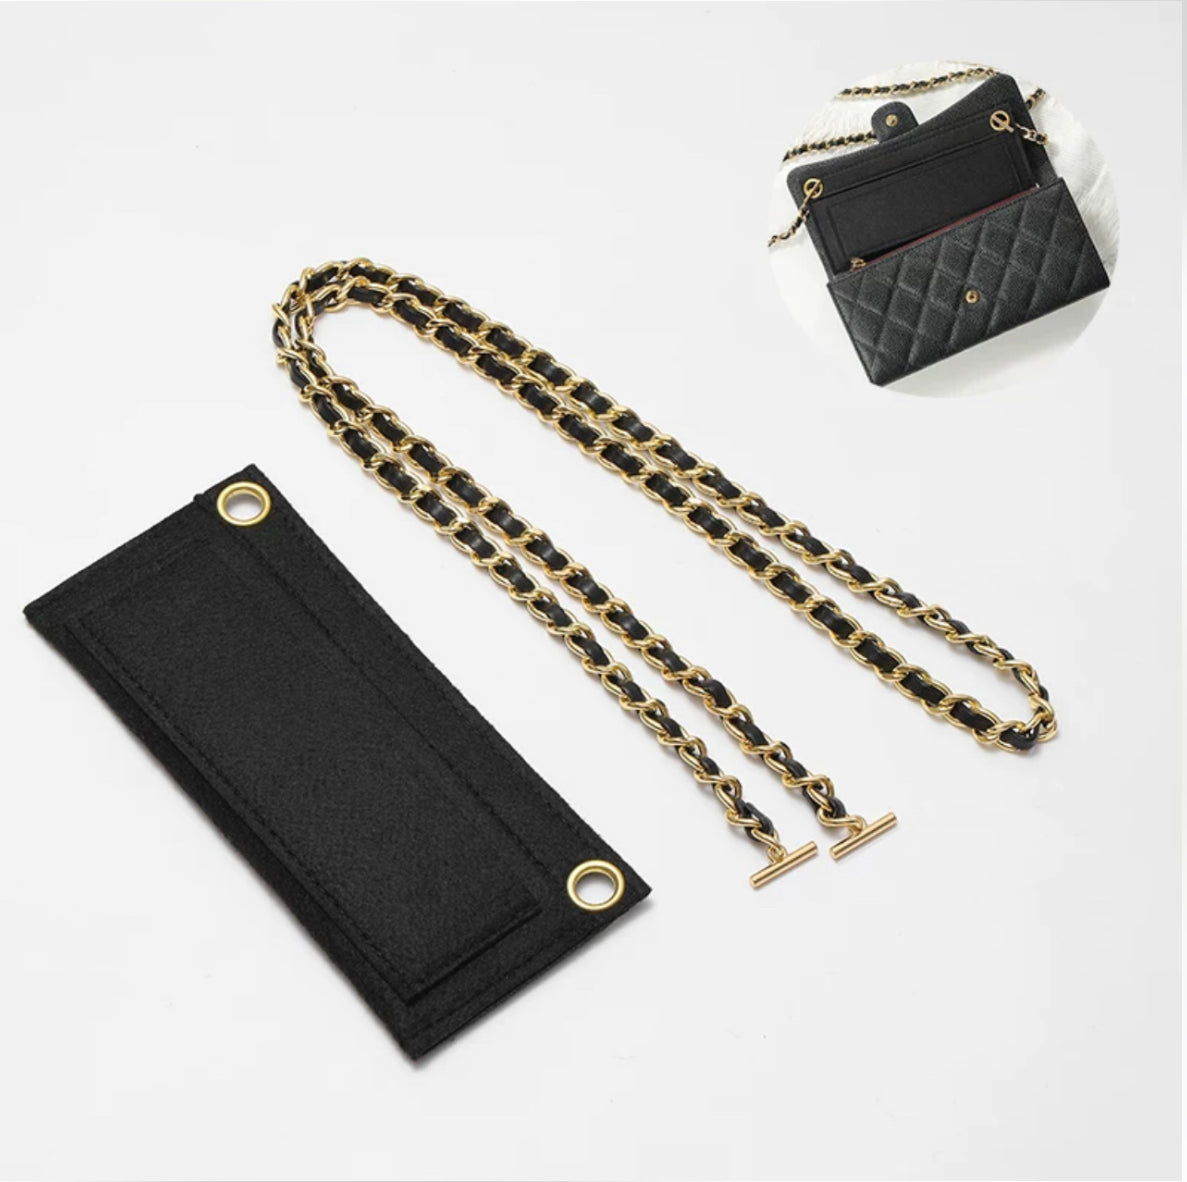 Wallet on Chain Bag